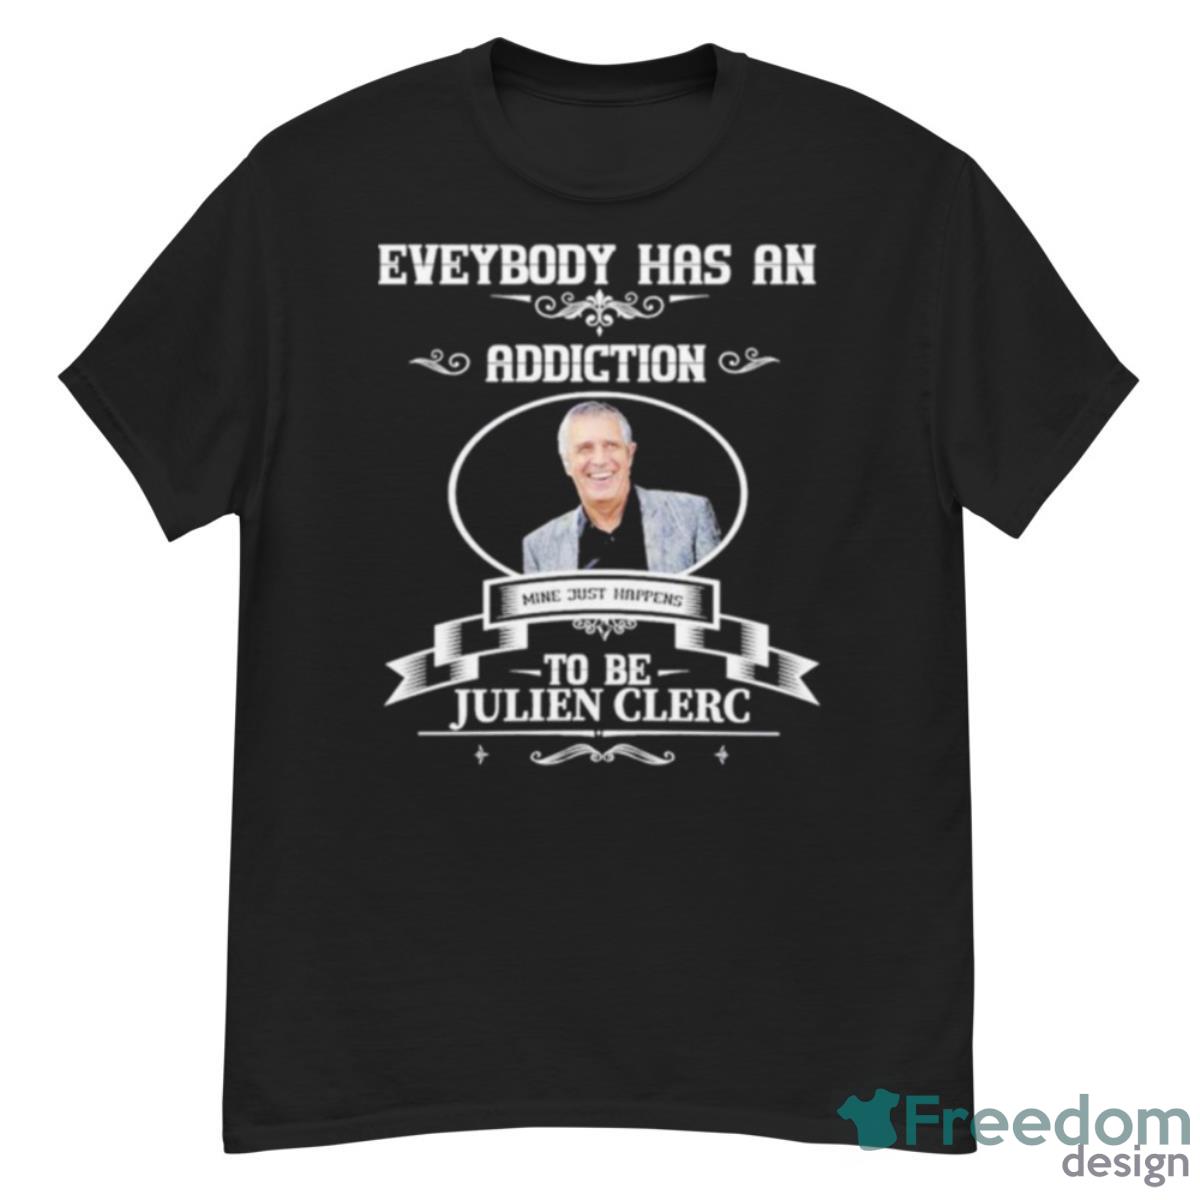 Everybody Has An Addiction Mine Just Happens To Be Julien Clerc Shirt - G500 Men’s Classic T-Shirt